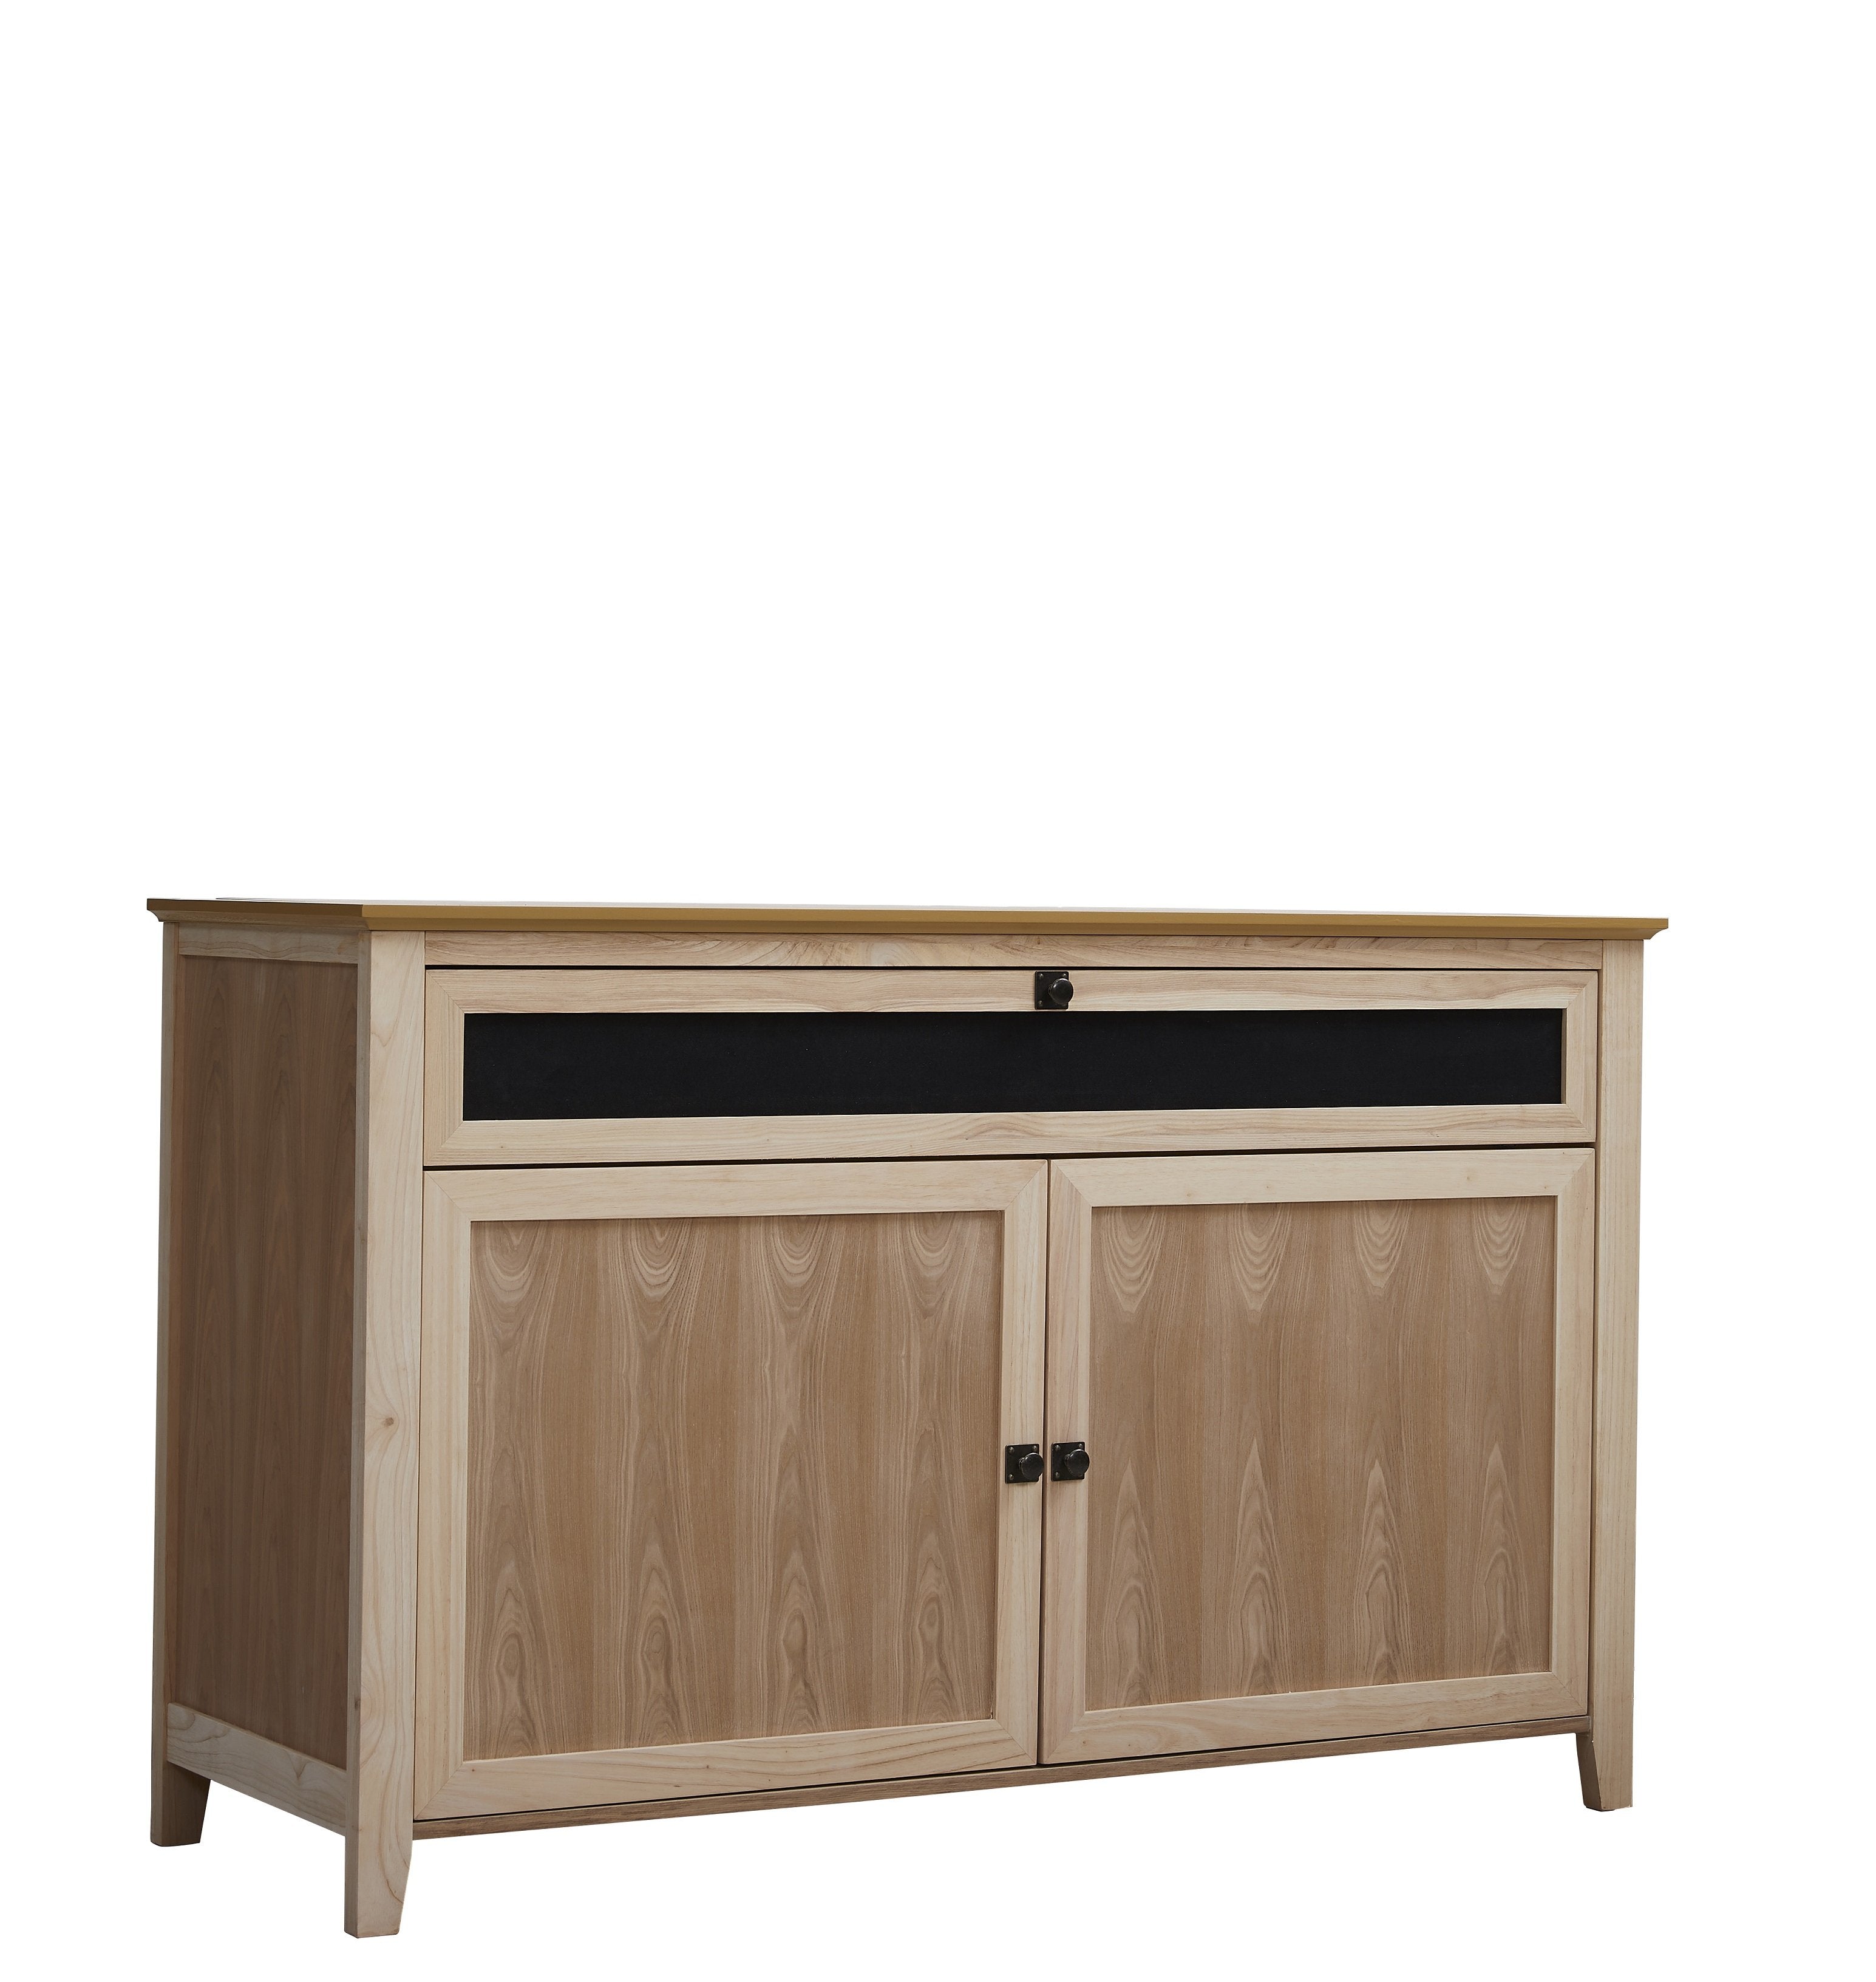 The Claymont Unfinished 70163 TV Lift Cabinet for 65 inch Flat screen TVs with a white background.